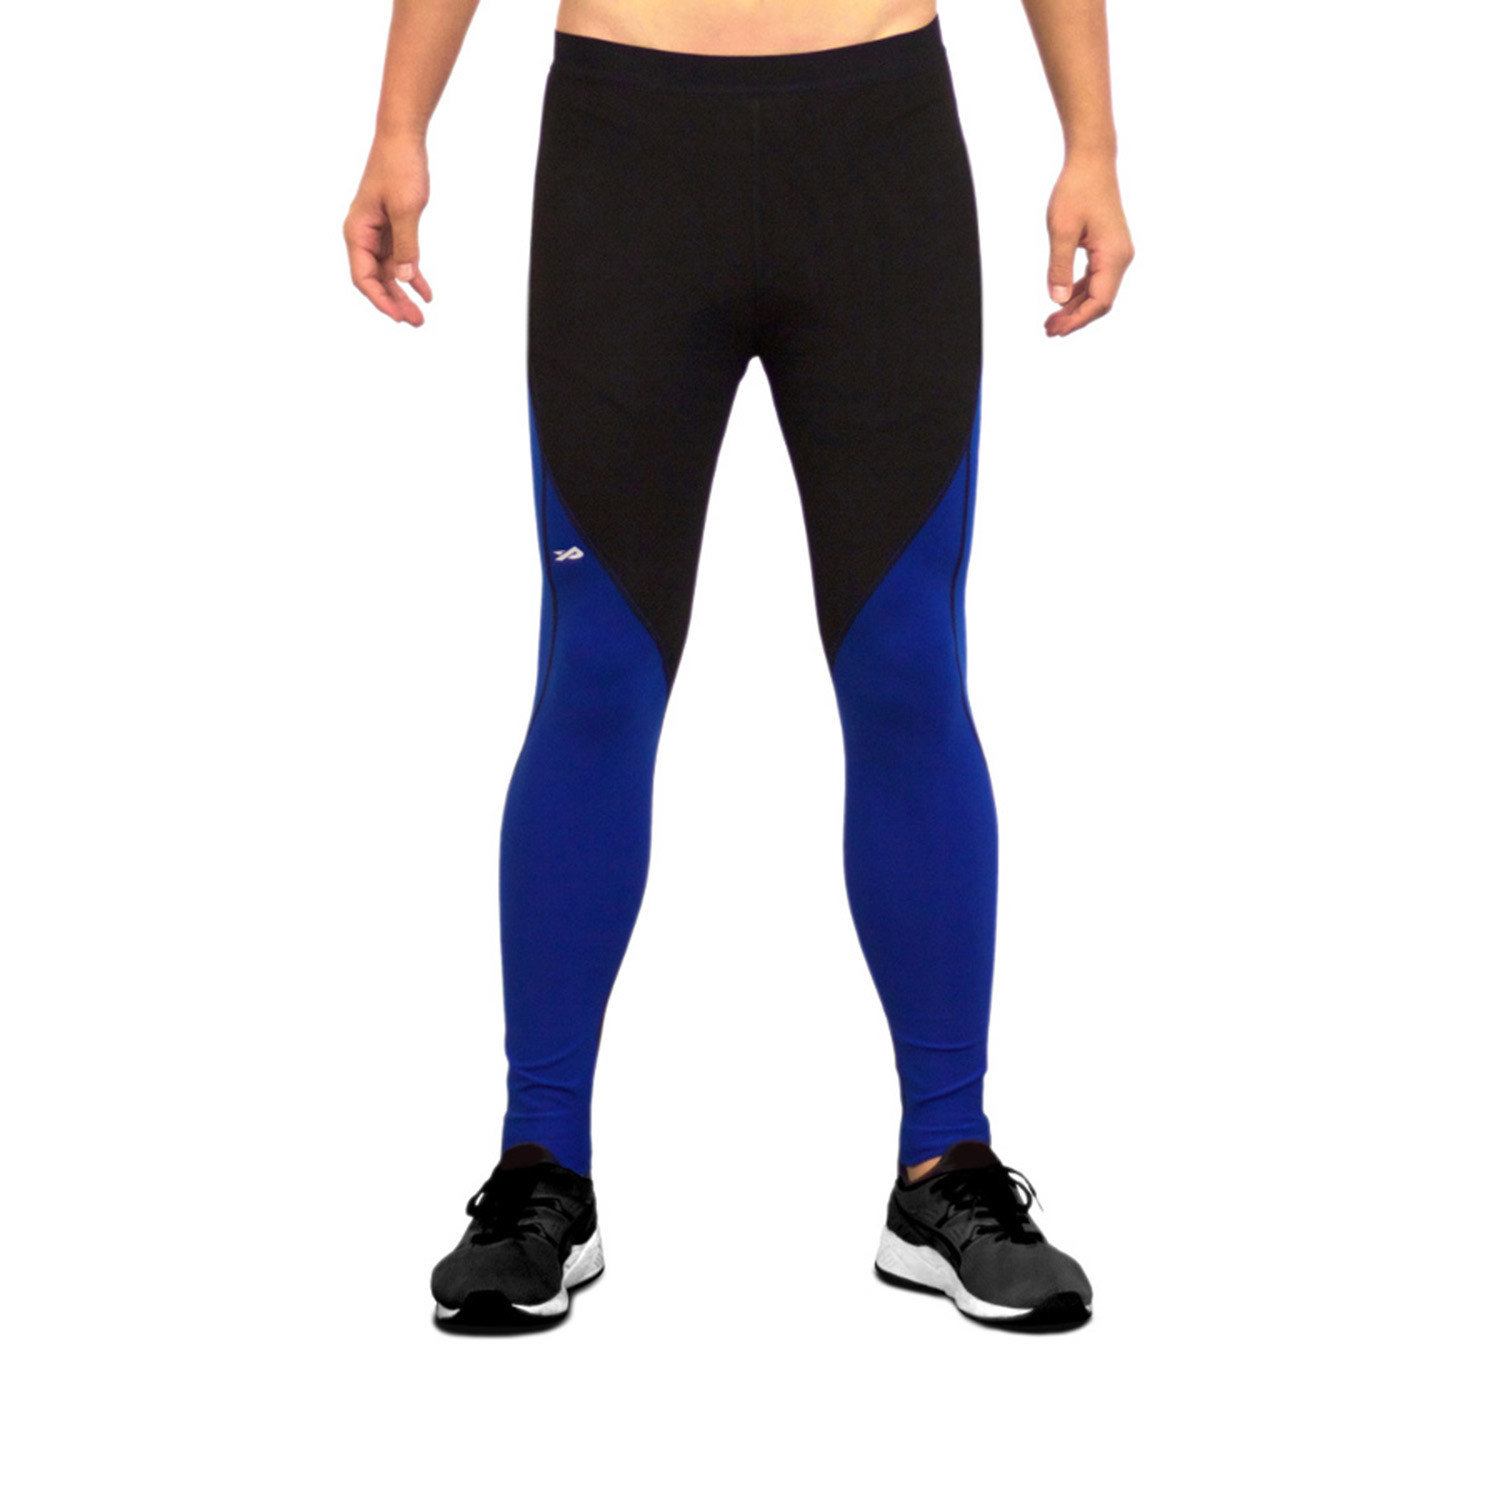 Simple Navy Workout Tights for Push Pull Legs